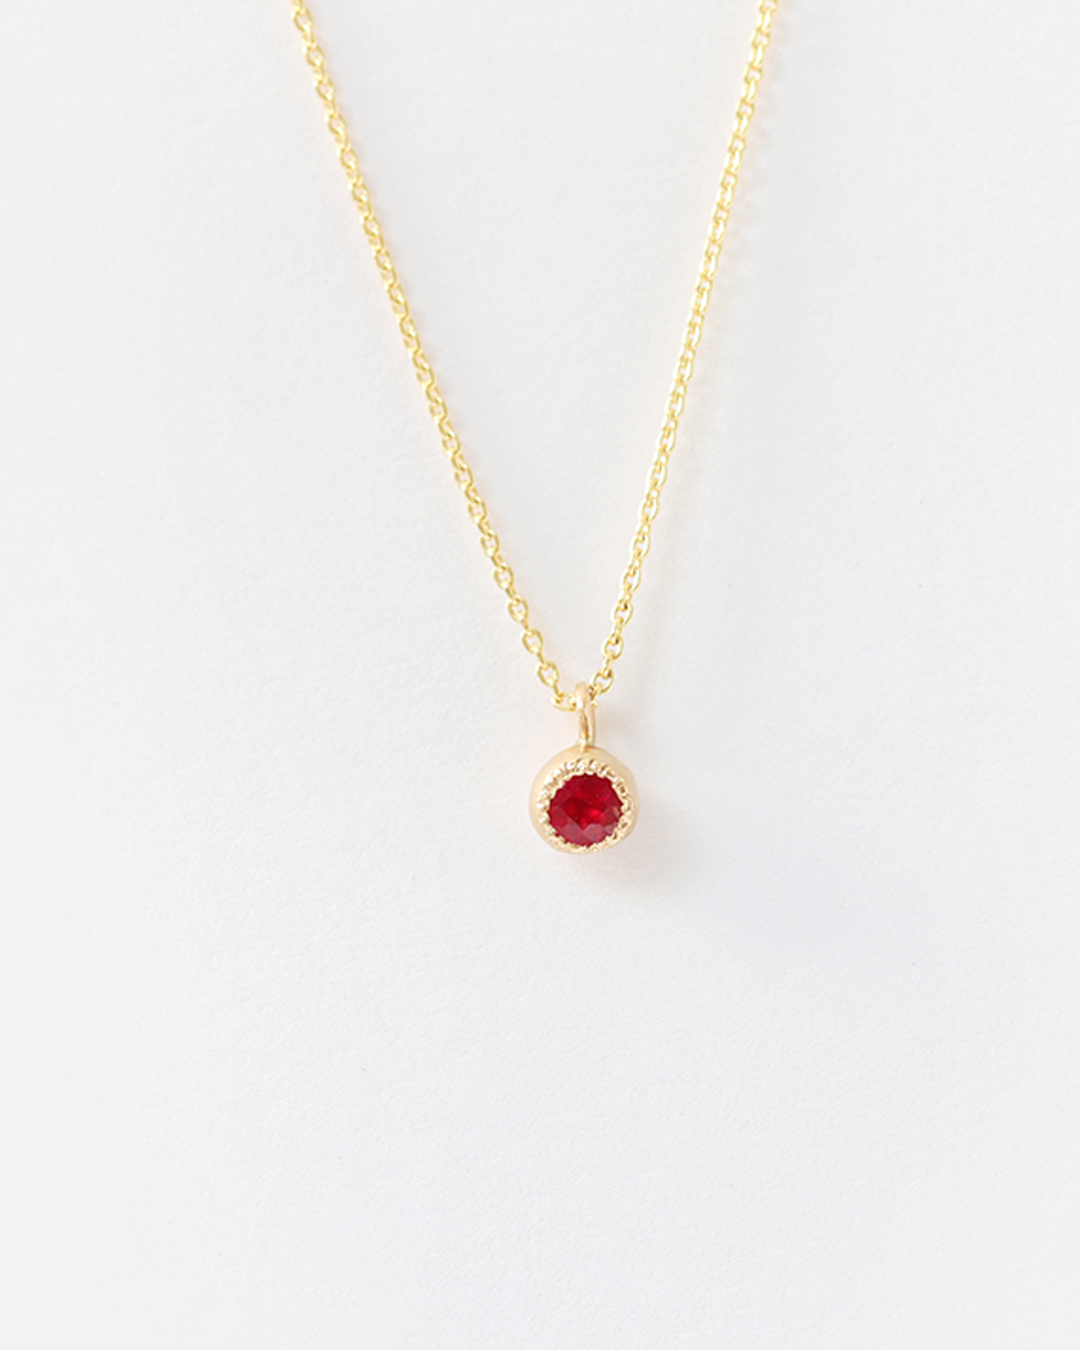 Melee Ball / Ruby Pendant By Hiroyo in pendants Category